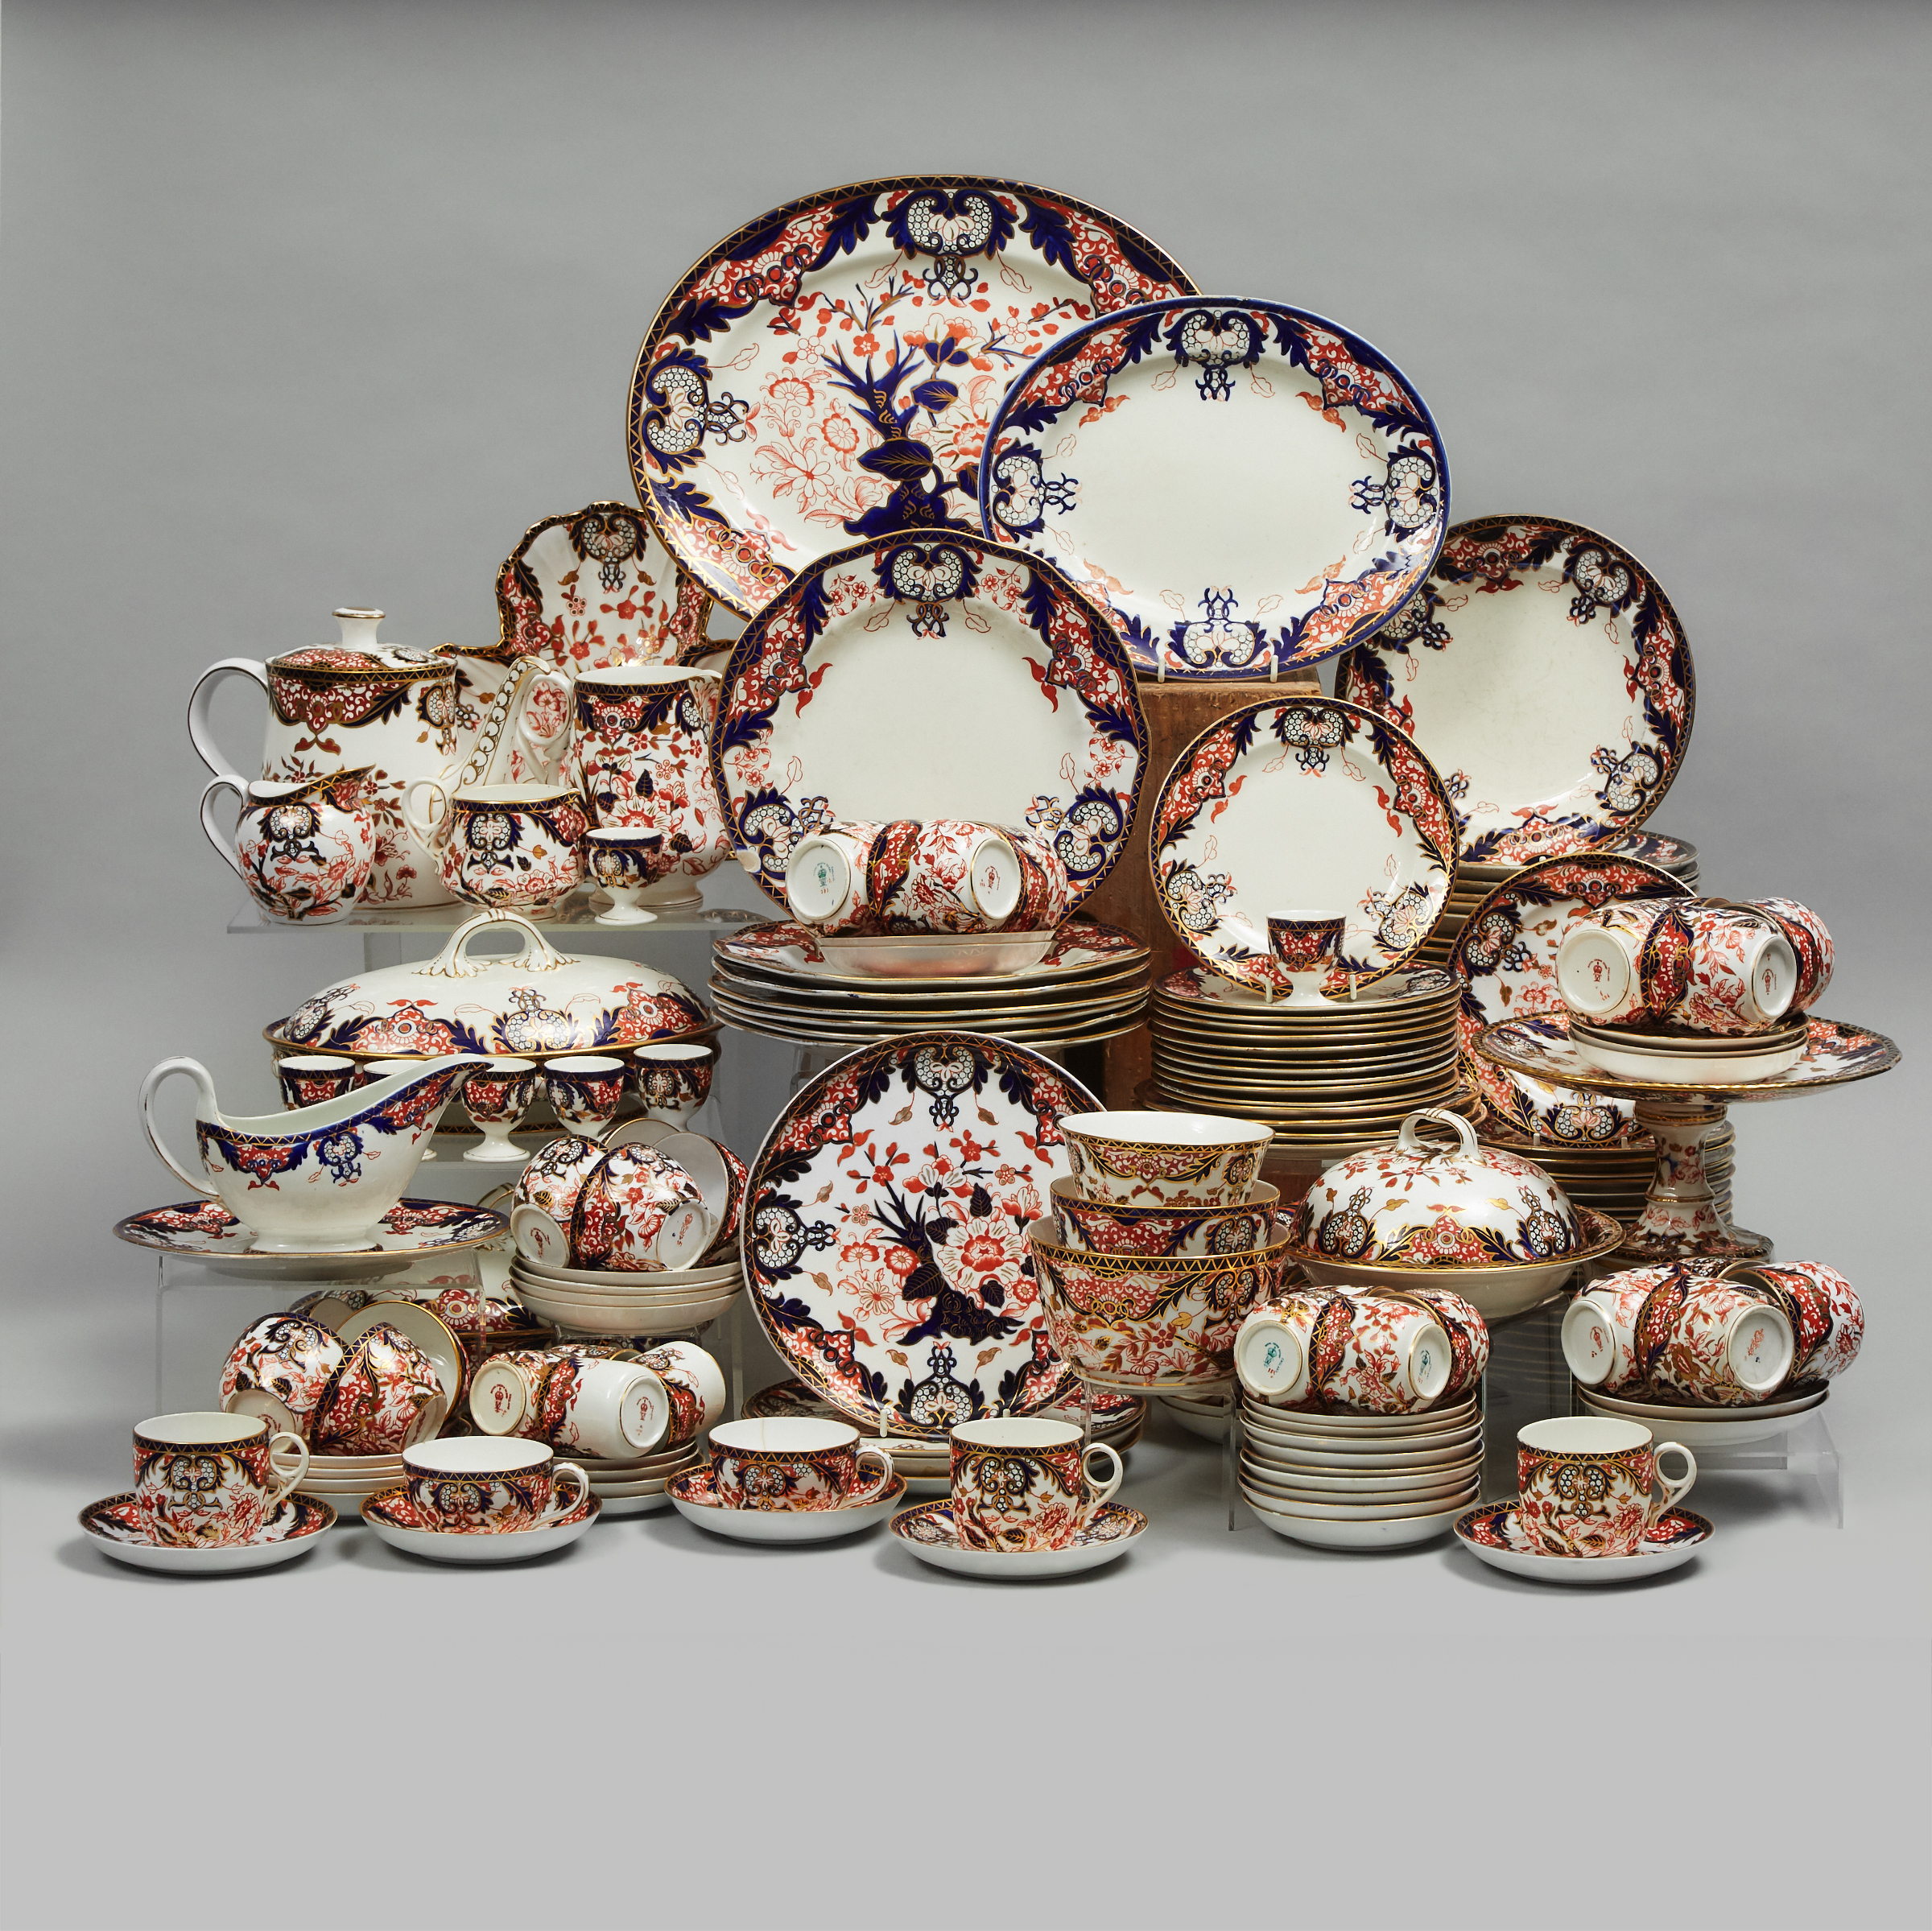 Royal Crown Derby 'Kings' (1270, 3590, 3615, 383, and 563) Pattern Service, late 19th/20th century